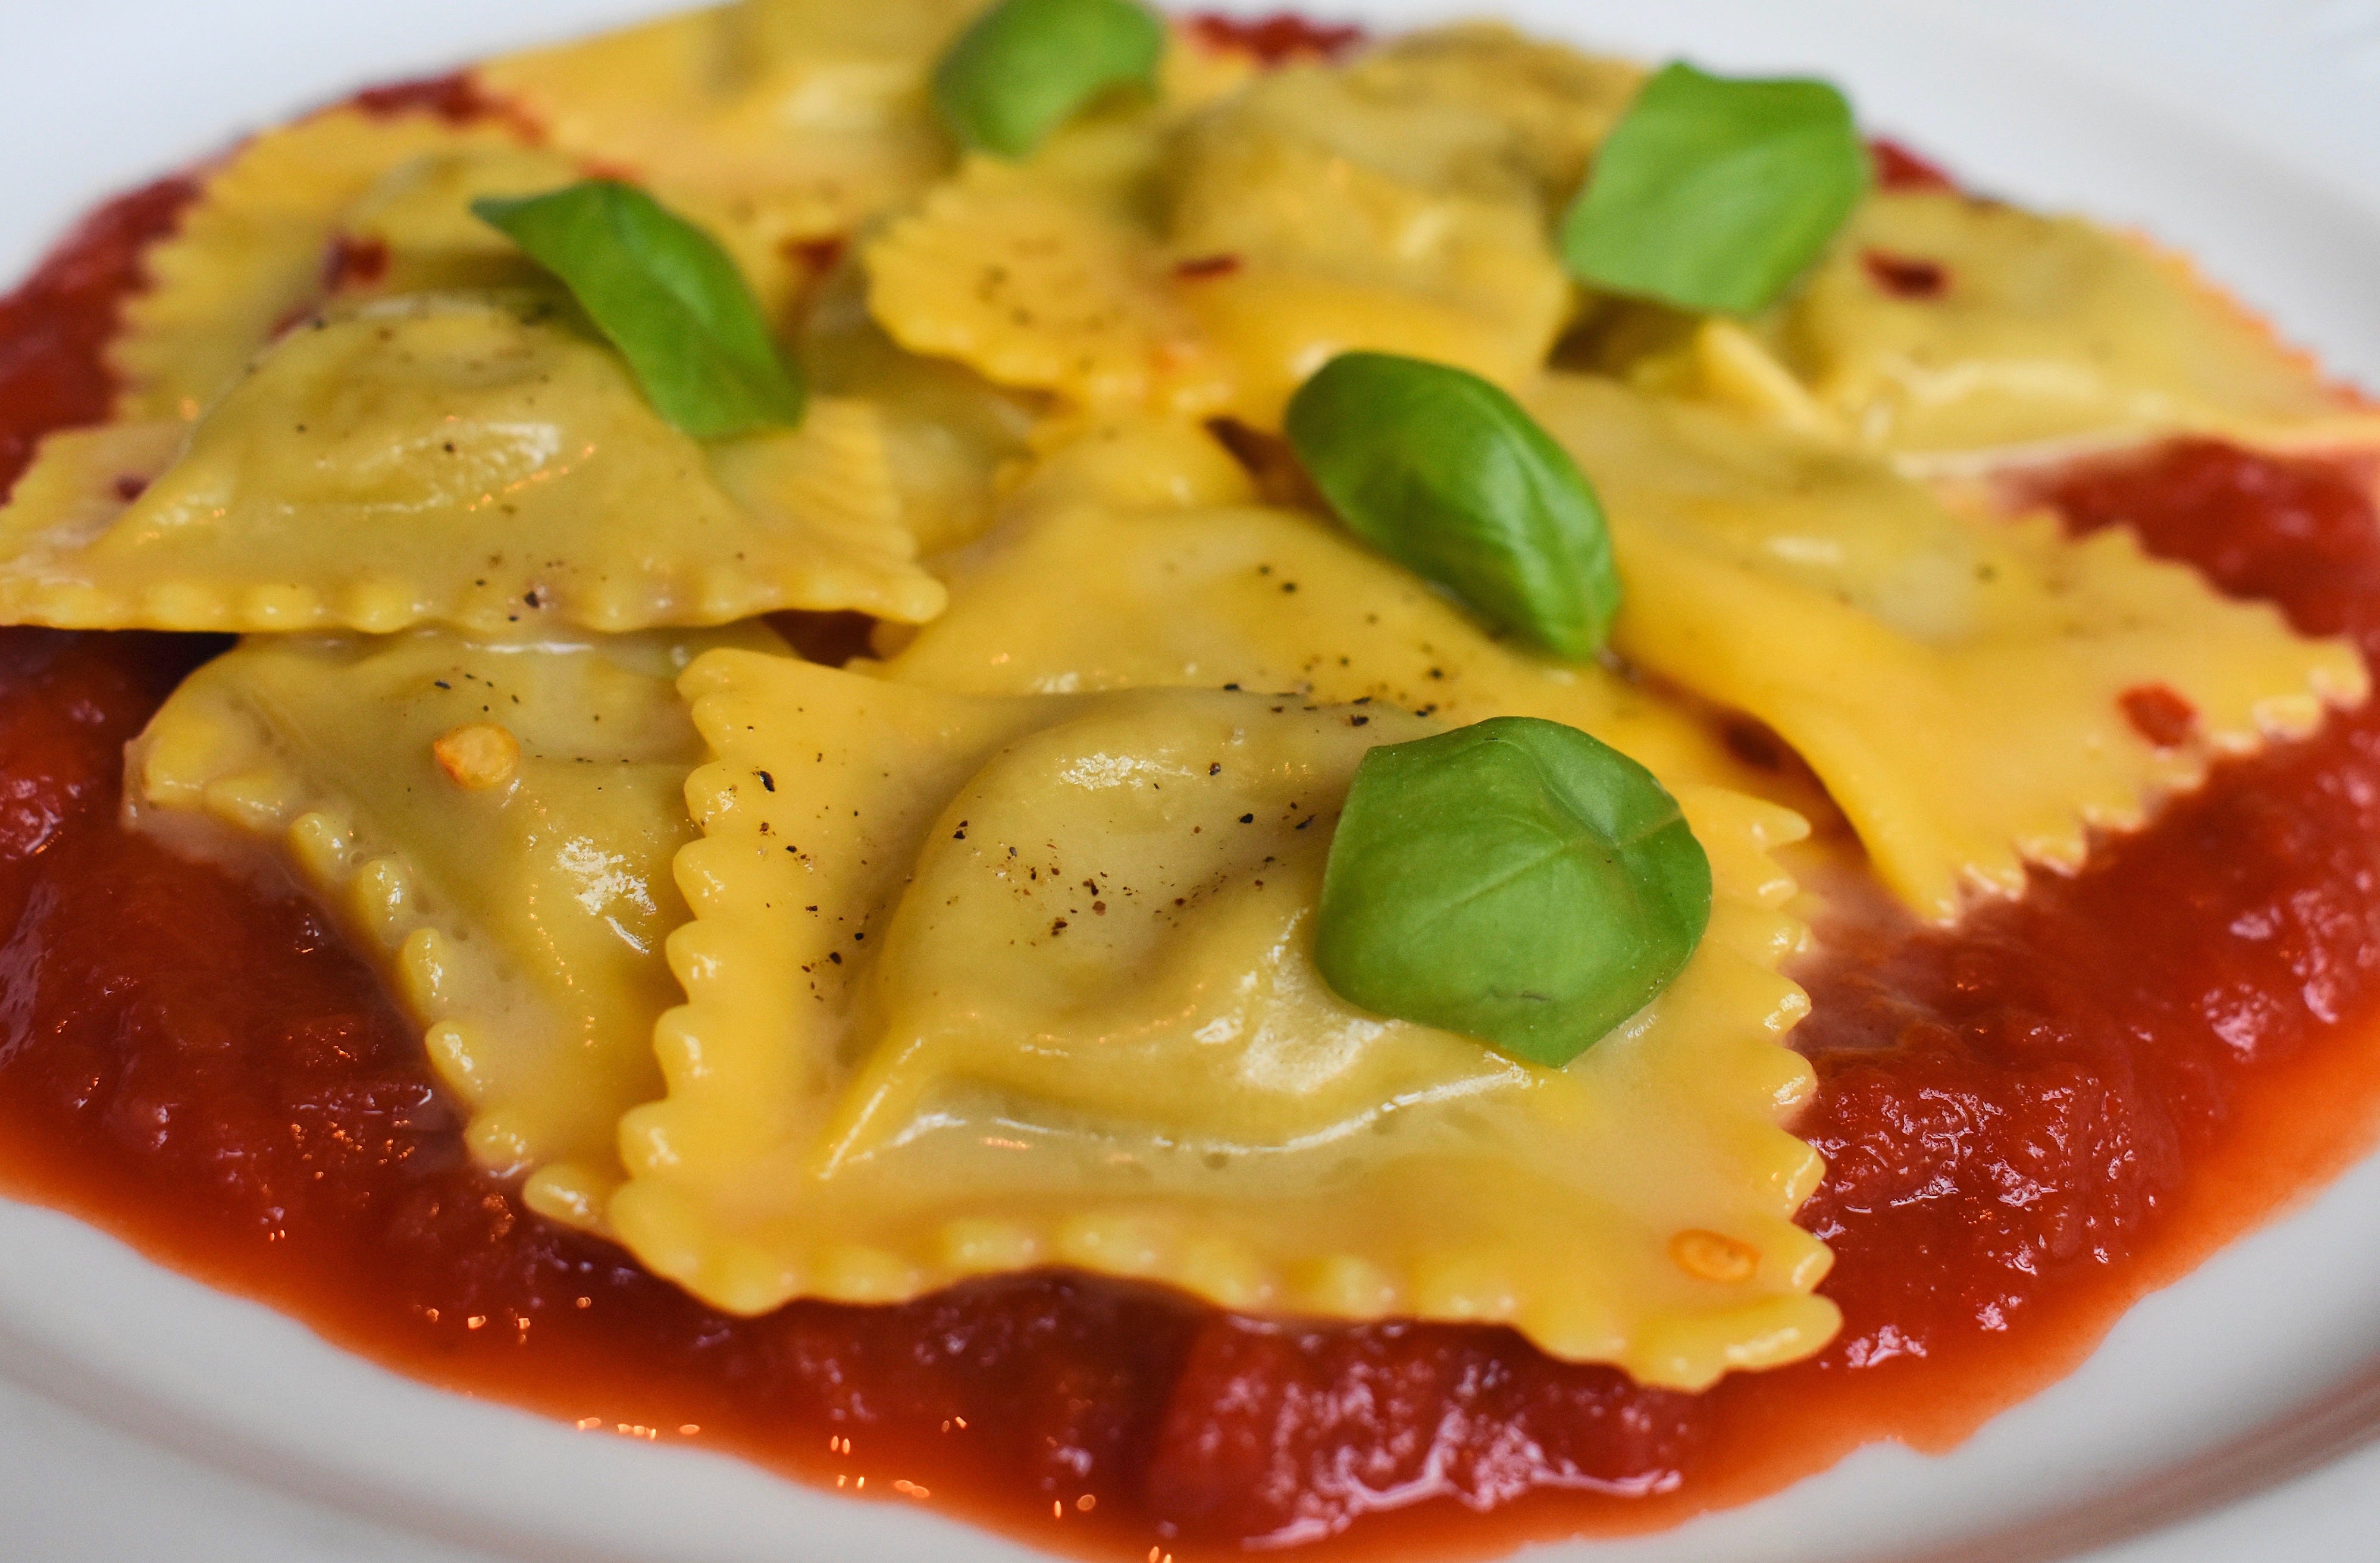 The pasta section of the menu offers a dish called simply "My Grandmother's Ravioli" at San Morello in Detroit.